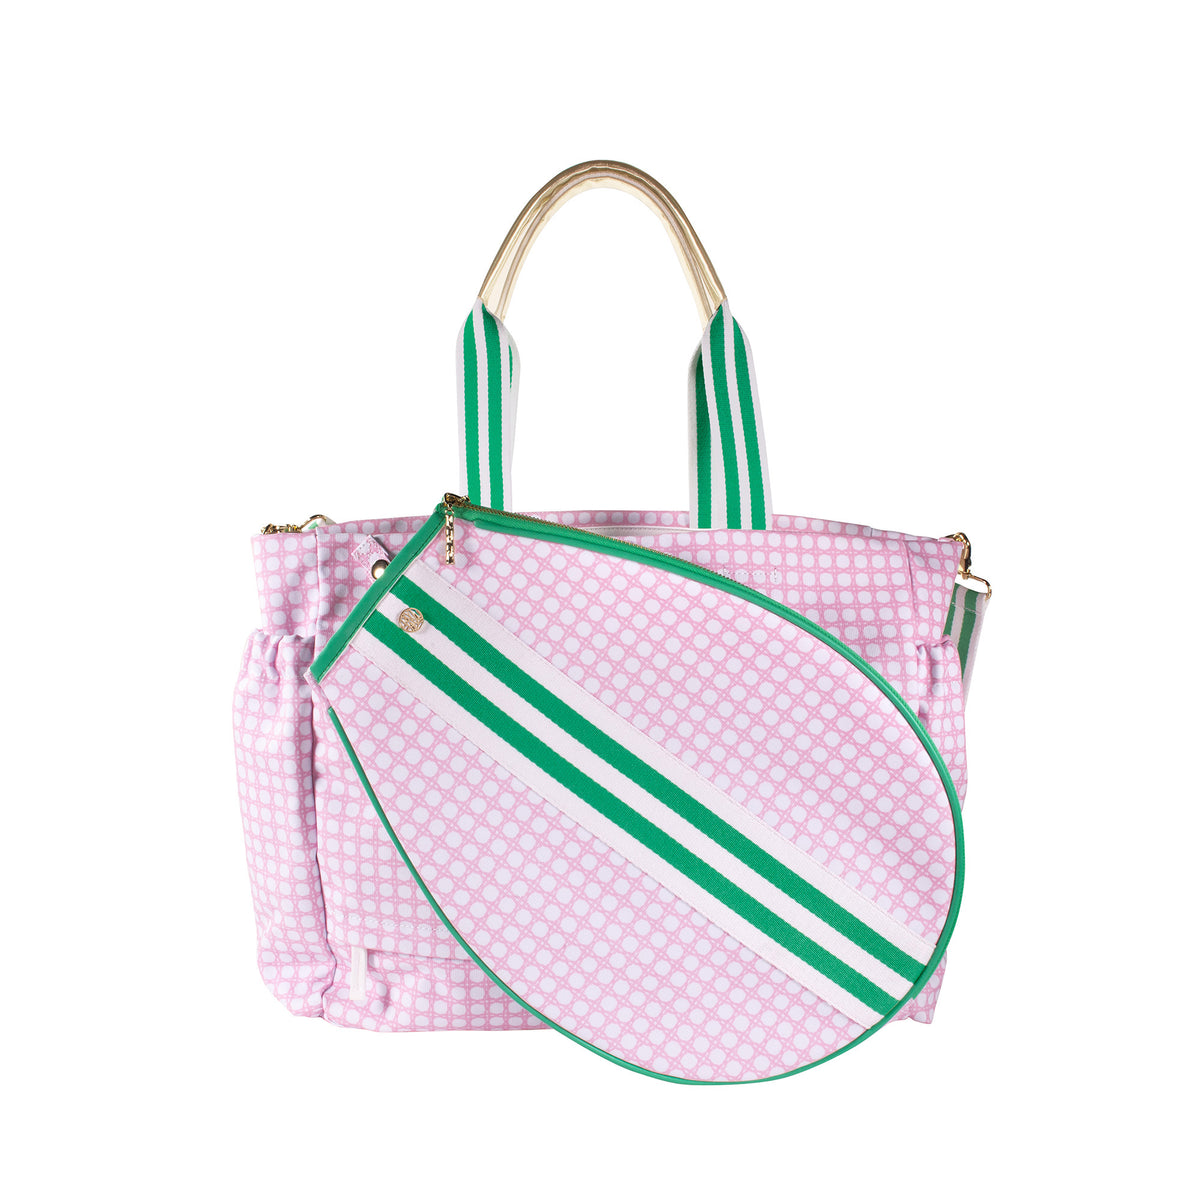 Tennis Tote by Lilly Pulitzer - The Preppy Bunny